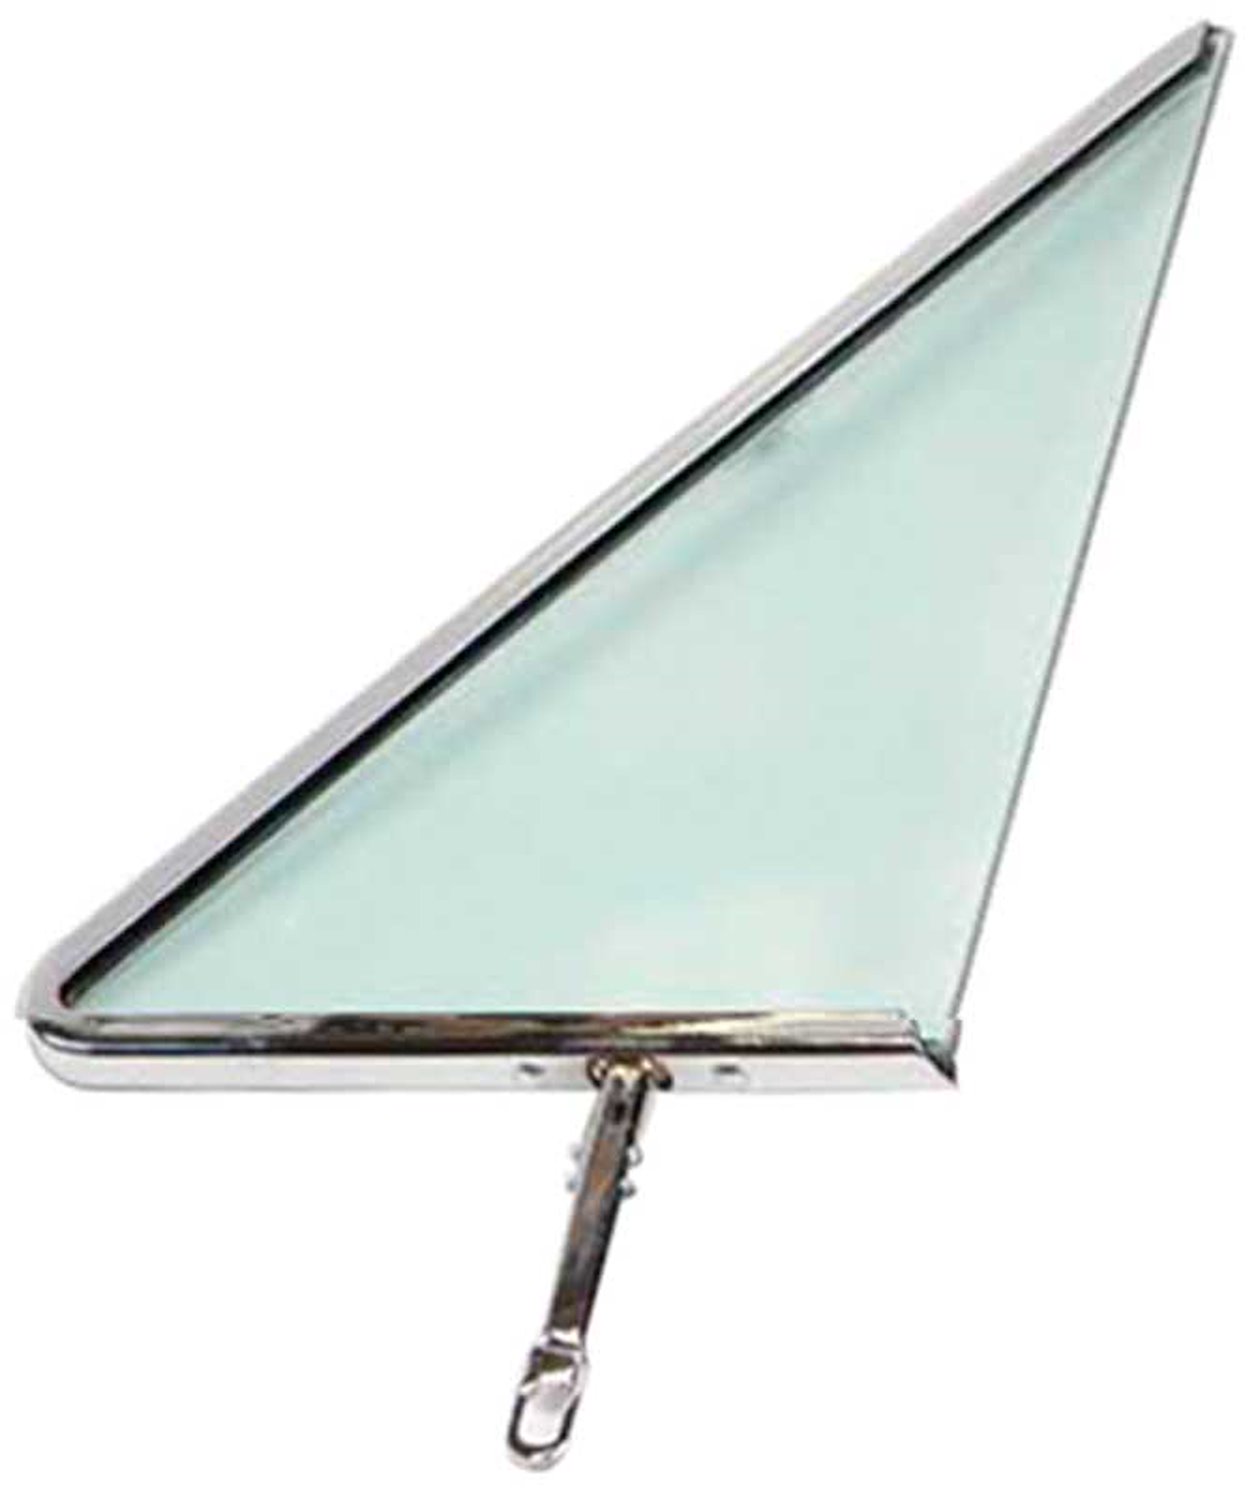 A1652 Vent Assembly 1963-64 Impala Bel Air, Biscayne; Hardtop & Convertible; Tinted Glass; LH